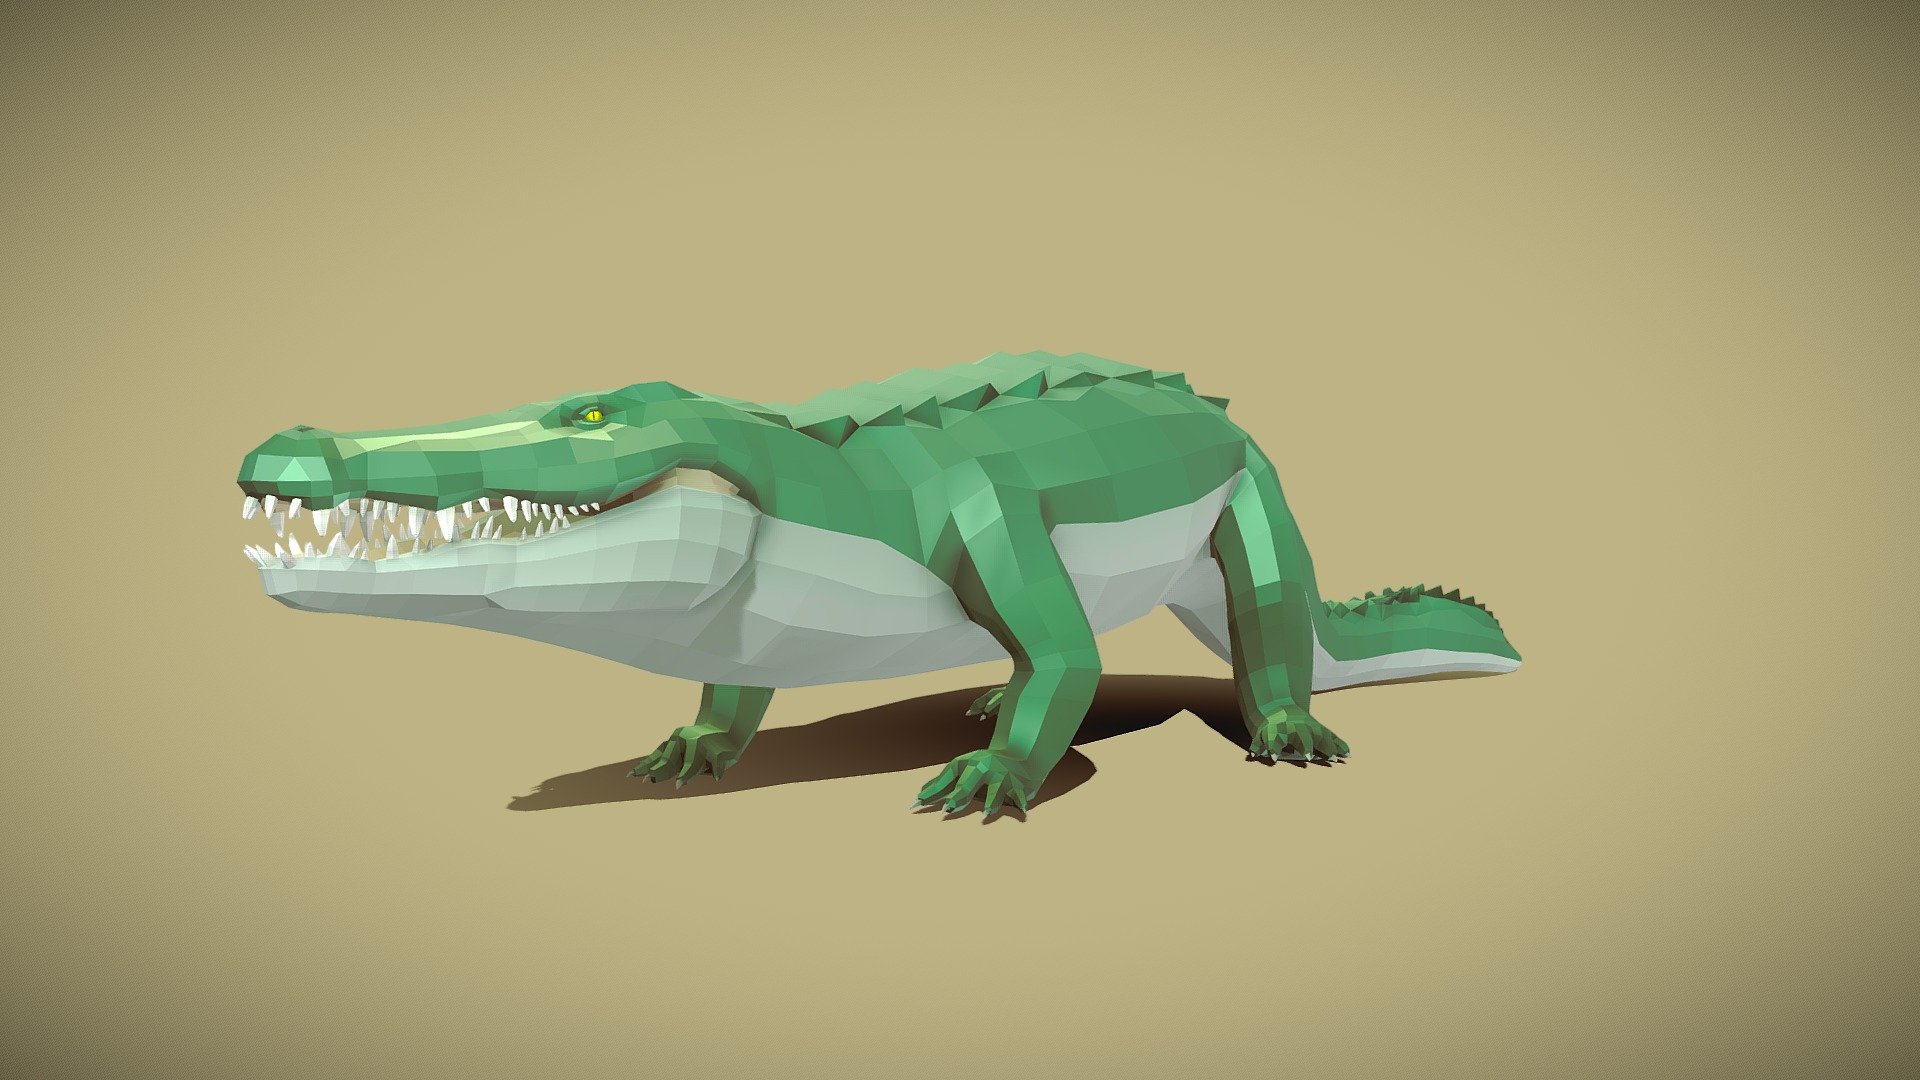 Check the Unity Showcase here:
https://youtu.be/5LiJotr1c2I

Customizable 3D Crocodile with many options including:

AAA Detailed Animations, Textures, Blendshapes and scalable bones to get more unique variants.
Unity Project Inlcuded. Unreal Projet: Soon

Technical details




Number of textures: 9

Blendshapes/Morhps: 15

Texture dimensions: 4K

Polygon count of [Crocodile PA]

Number of meshes: 1(Body)

Rigging: Yes

Animation count: : 74

Animation type list: RootMotion &amp; In Place

UV mapping: Yes, Overlapping

ADDITIONAL LICENSE

The following custom license applies to this asset in addition to the EULA

END USER will be prohibited from using the asset license for the following products:




Creation &amp; Trading of Non-Fungible-Tokens (NFT) and/or use in Blockchain-based projects or products.

Creation of content for Metaverse related and/or Game creation software and products.

3D printing for commercial use.

Remix, transform or build upon the material, and re-sell the modified material.
 - Poly Art Crocodile - Buy Royalty Free 3D model by Malbers Animations (@malbers.shark87) 3d model